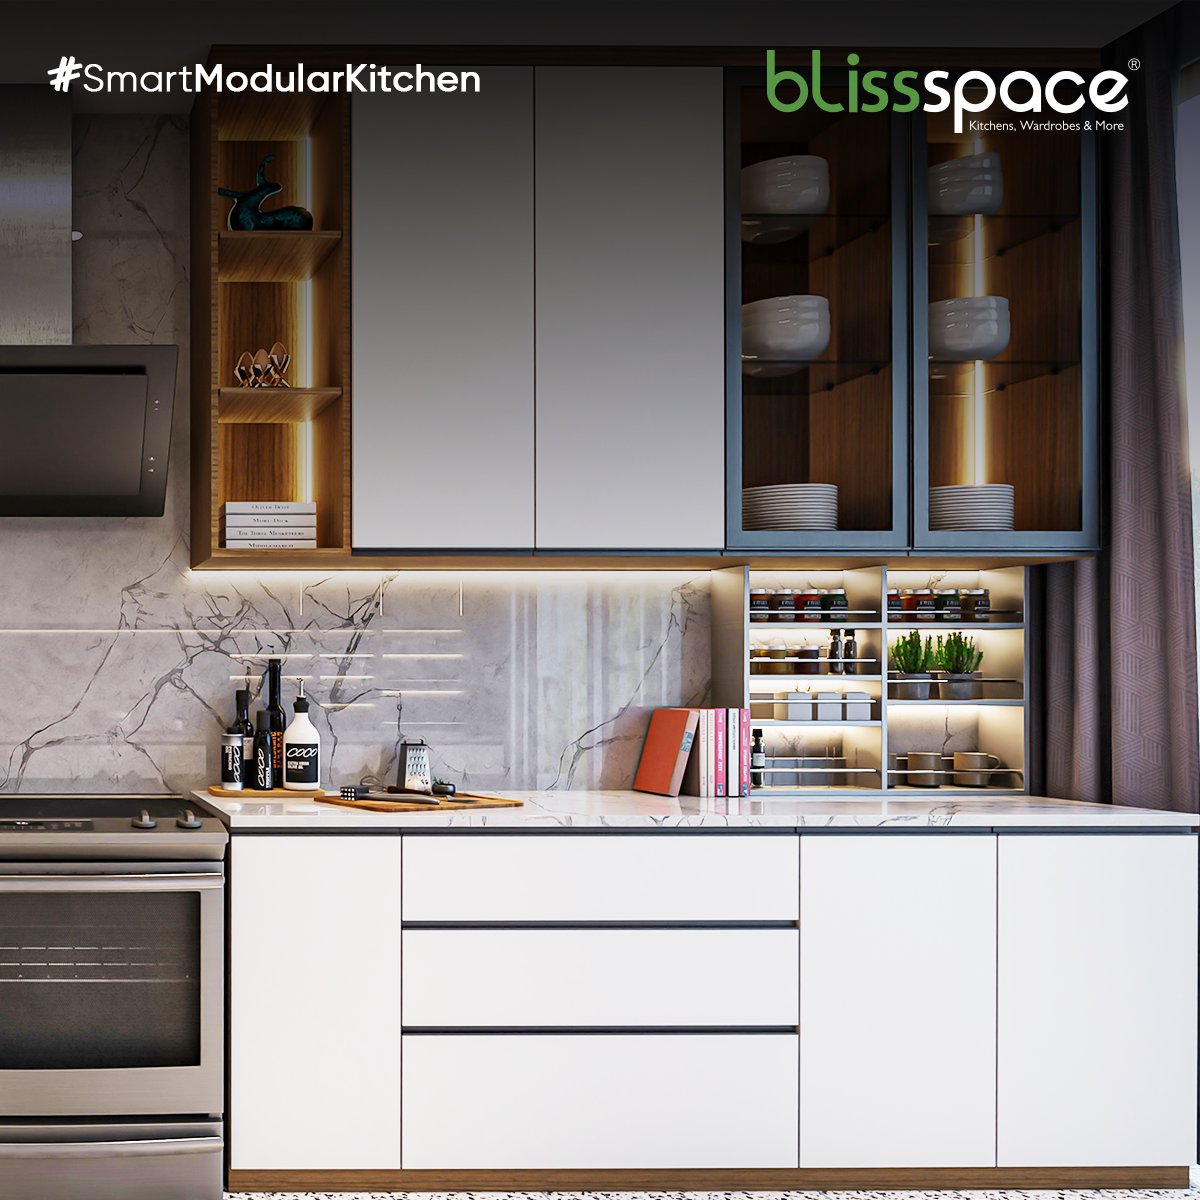 A clean, spacious and stylish kitchen is the dream & we are here to convert it into reality!

#BlissspaceIndia #Blissspace #BlissspaceDesigns #HomeDesigns  #Interiors #InteriorDesign #LuxuryInteriors #ModularSolutions #ModularKitchen #HomesByBlissSpace #BlissSpaceHomes